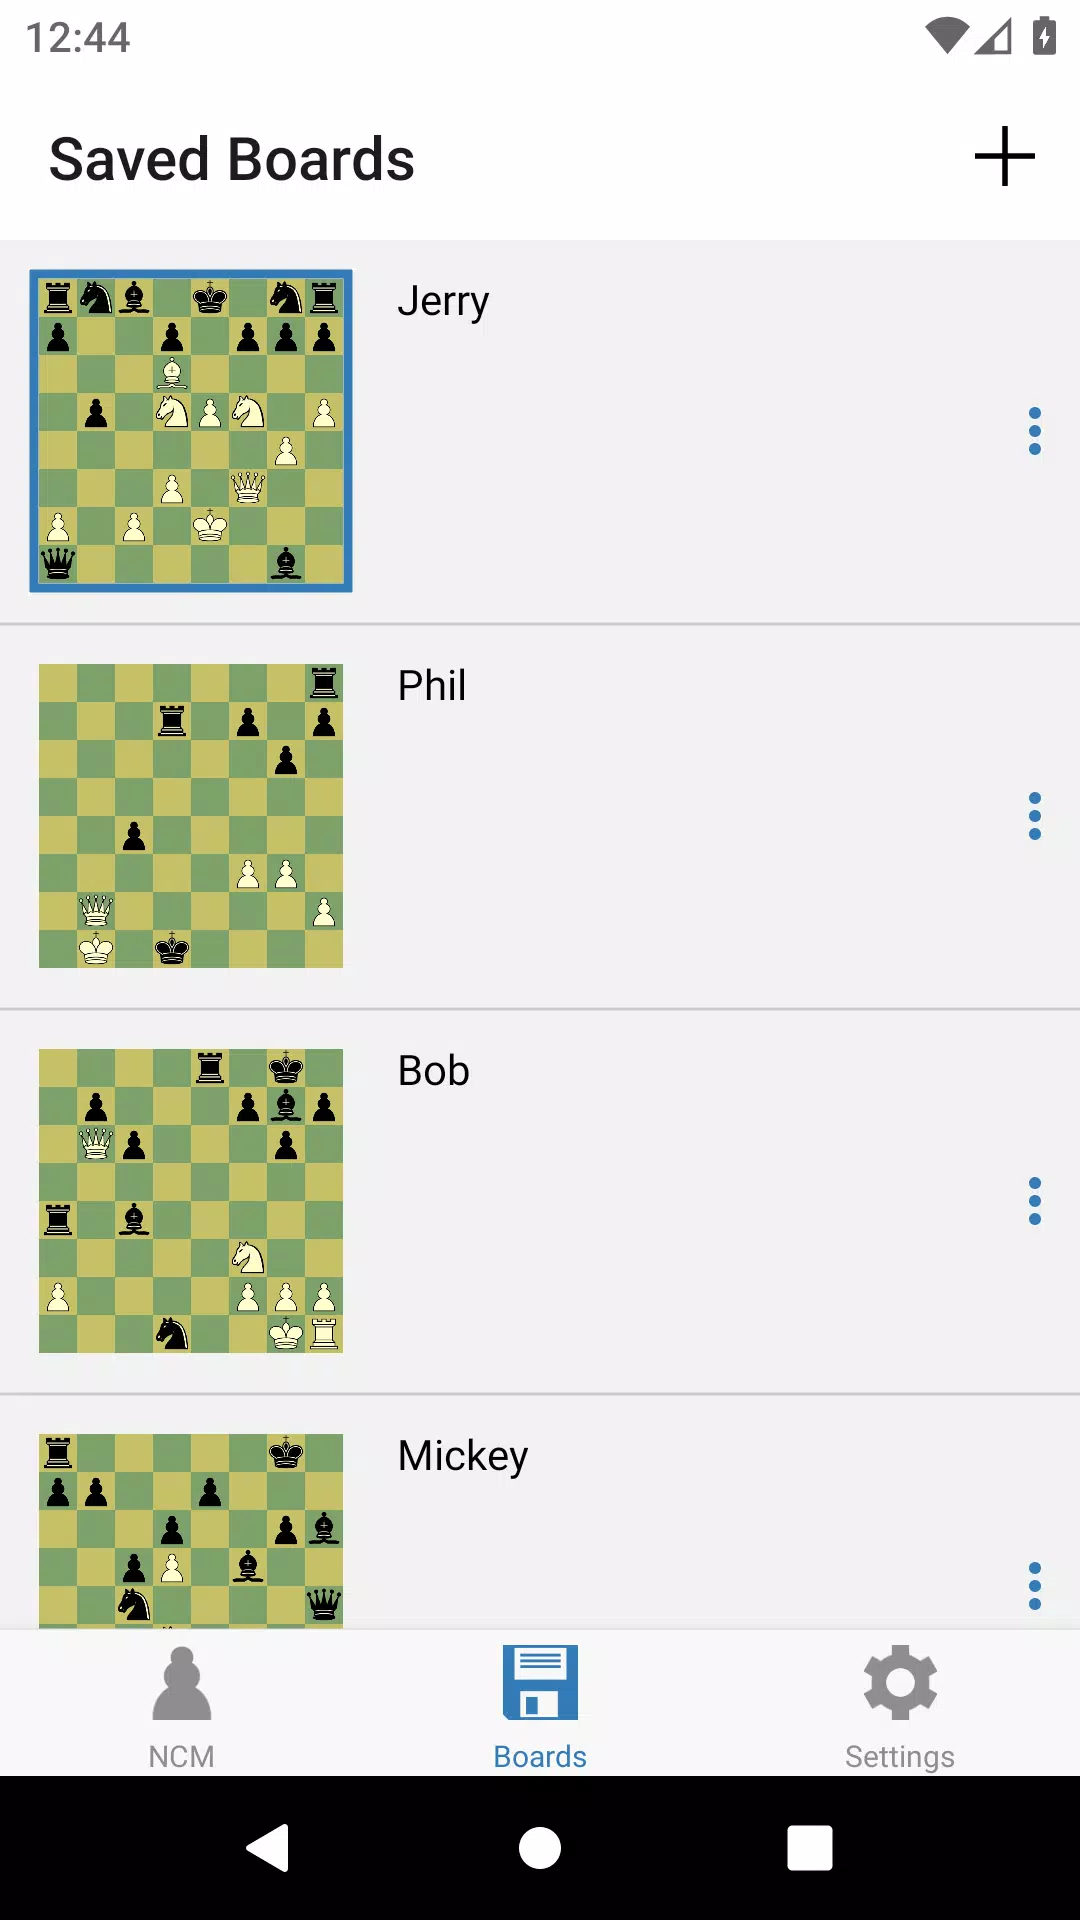 Next Chess Move APK (Android Game) - Free Download